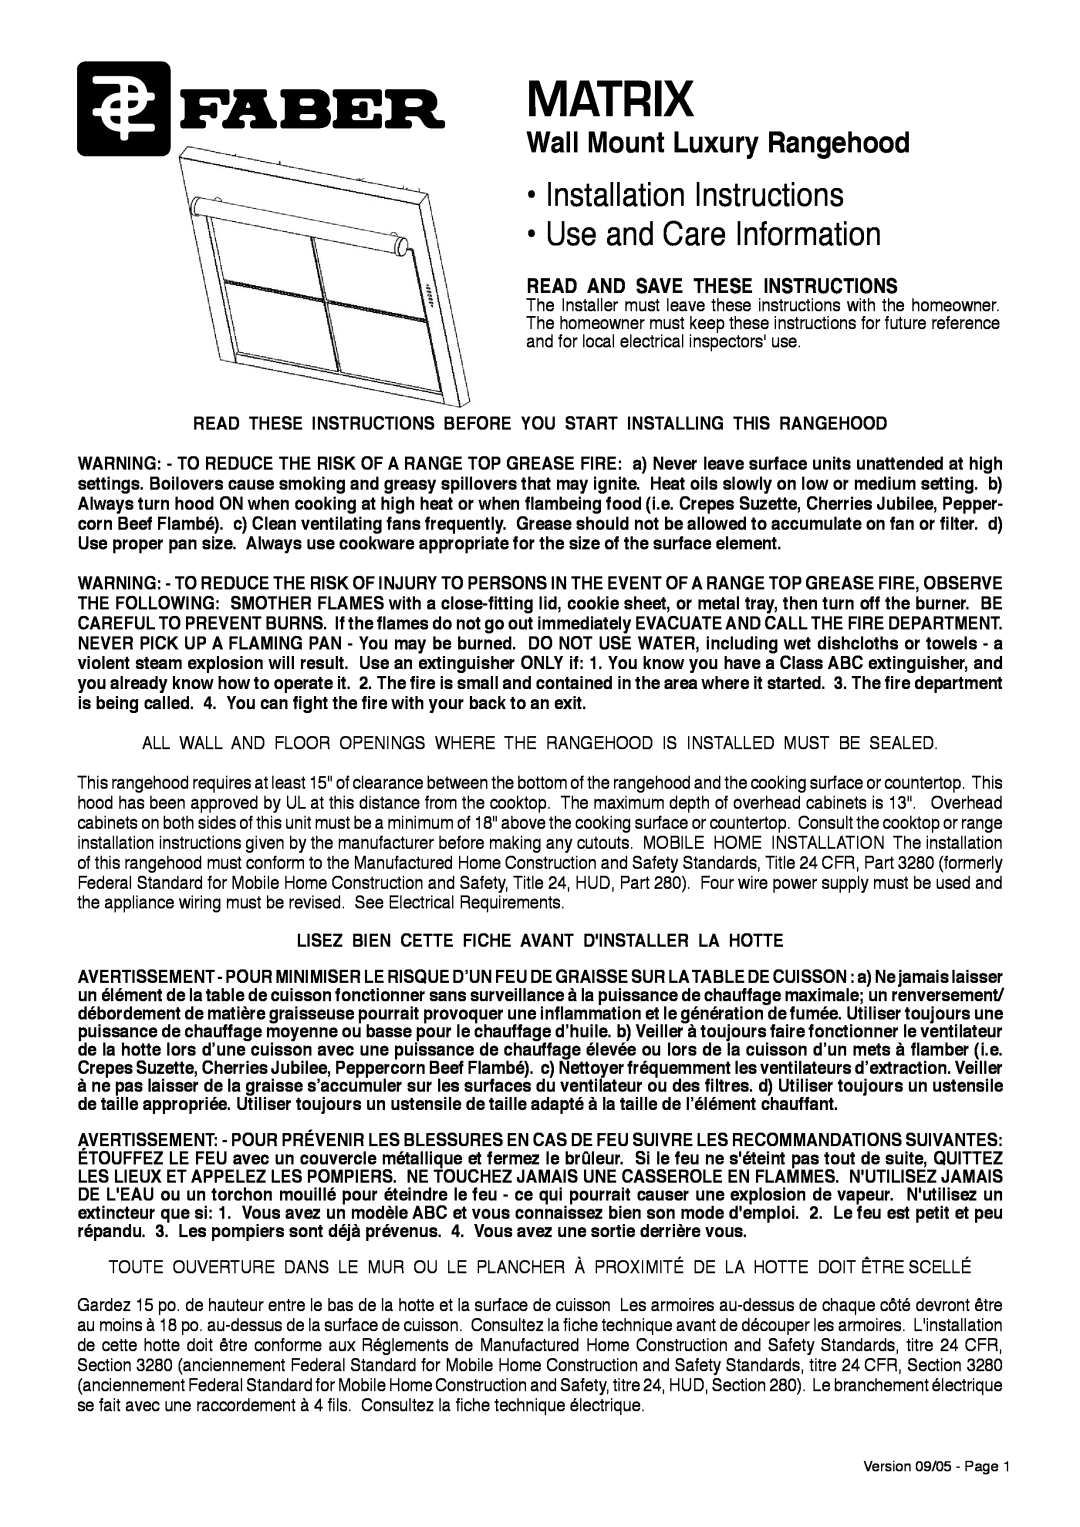 Faber Matrix installation instructions Read These Instructions Before You Start Installing This Rangehood 